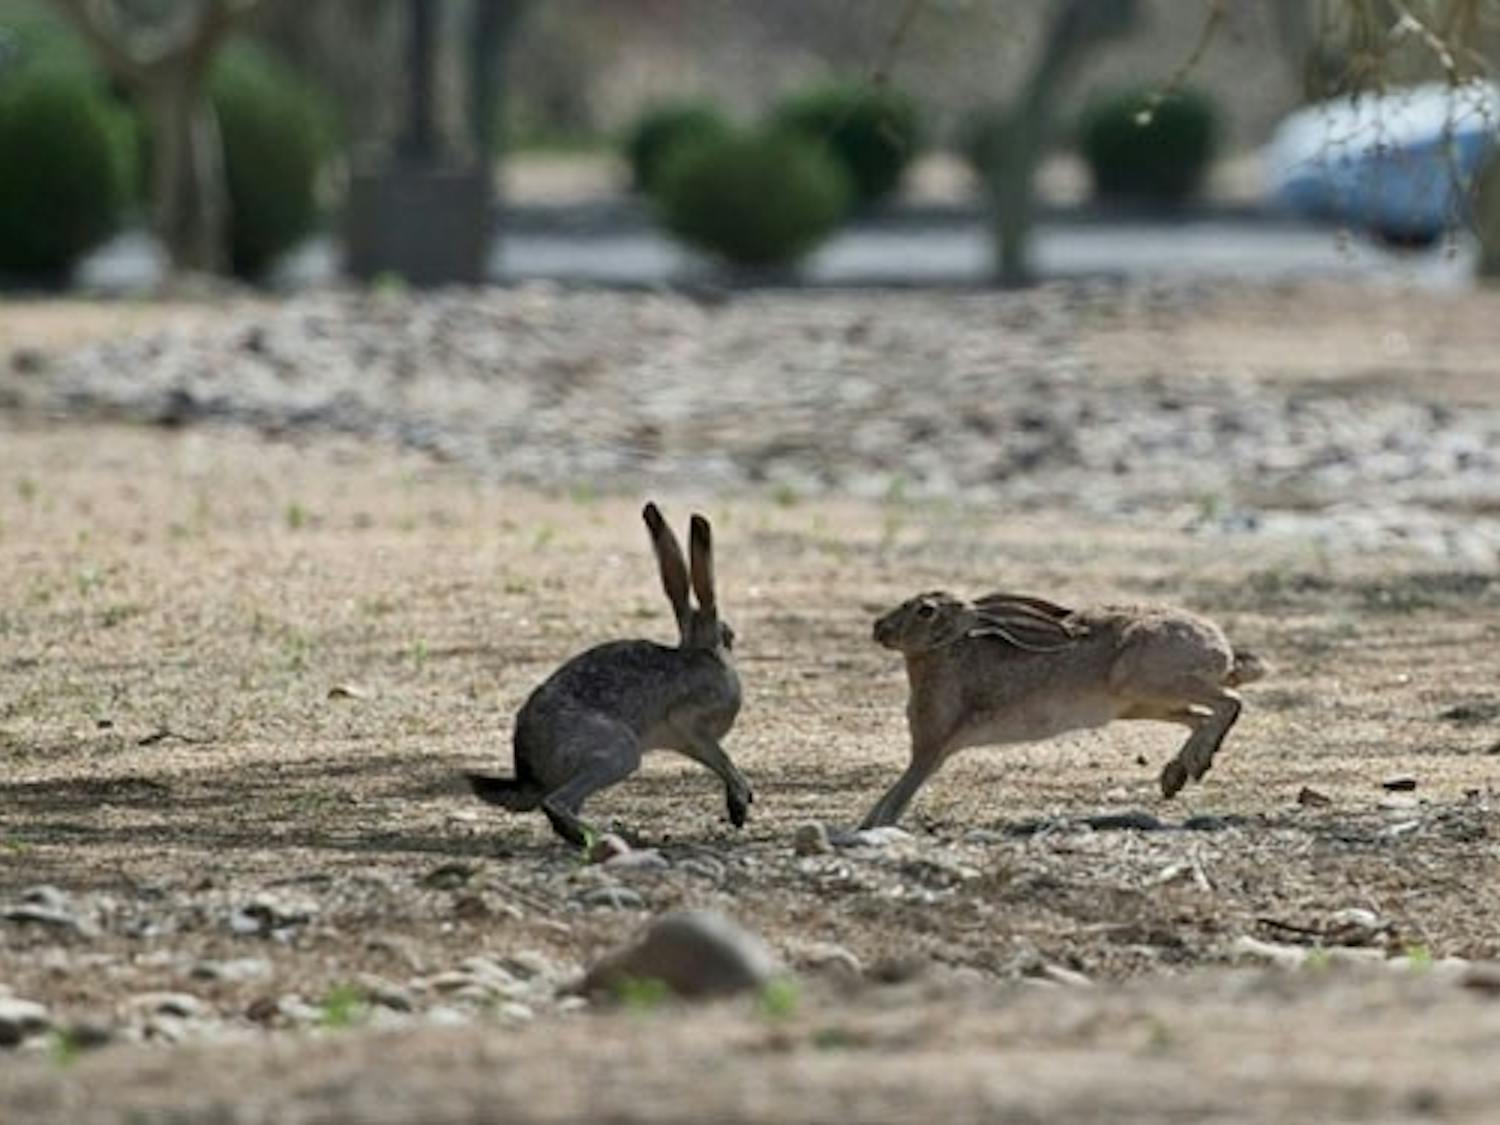 FROLICKING: Arizona blacktail jackrabbits were a common sight on the West campus during the warm afternoon. (Photo by Michael Arellano)